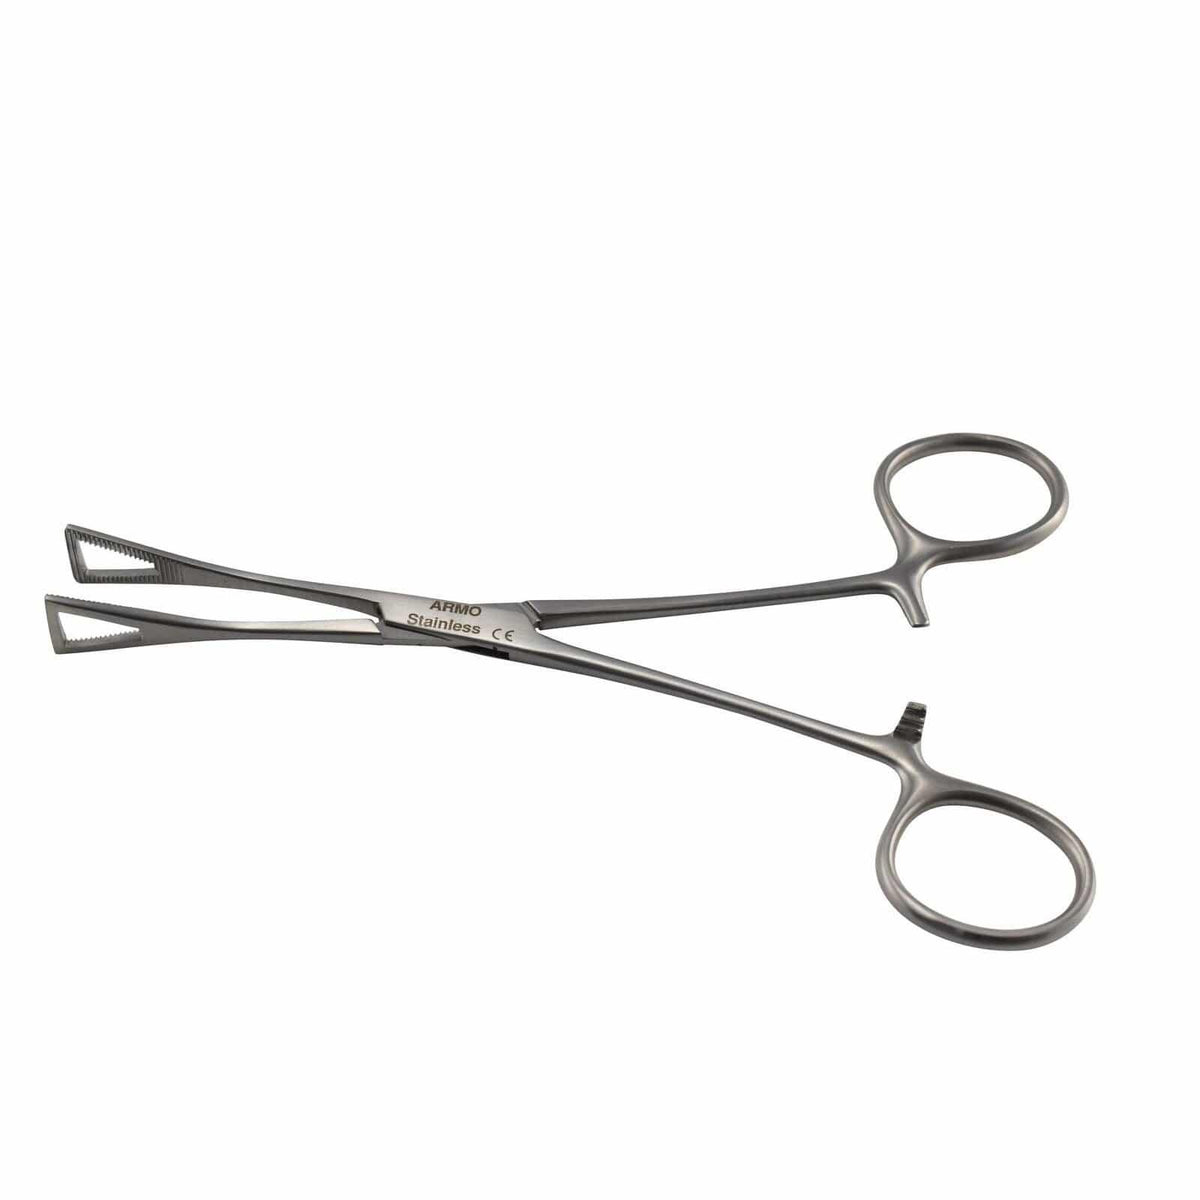 Armo Surgical Instruments 15cm Armo Pennington Forceps/Clamp